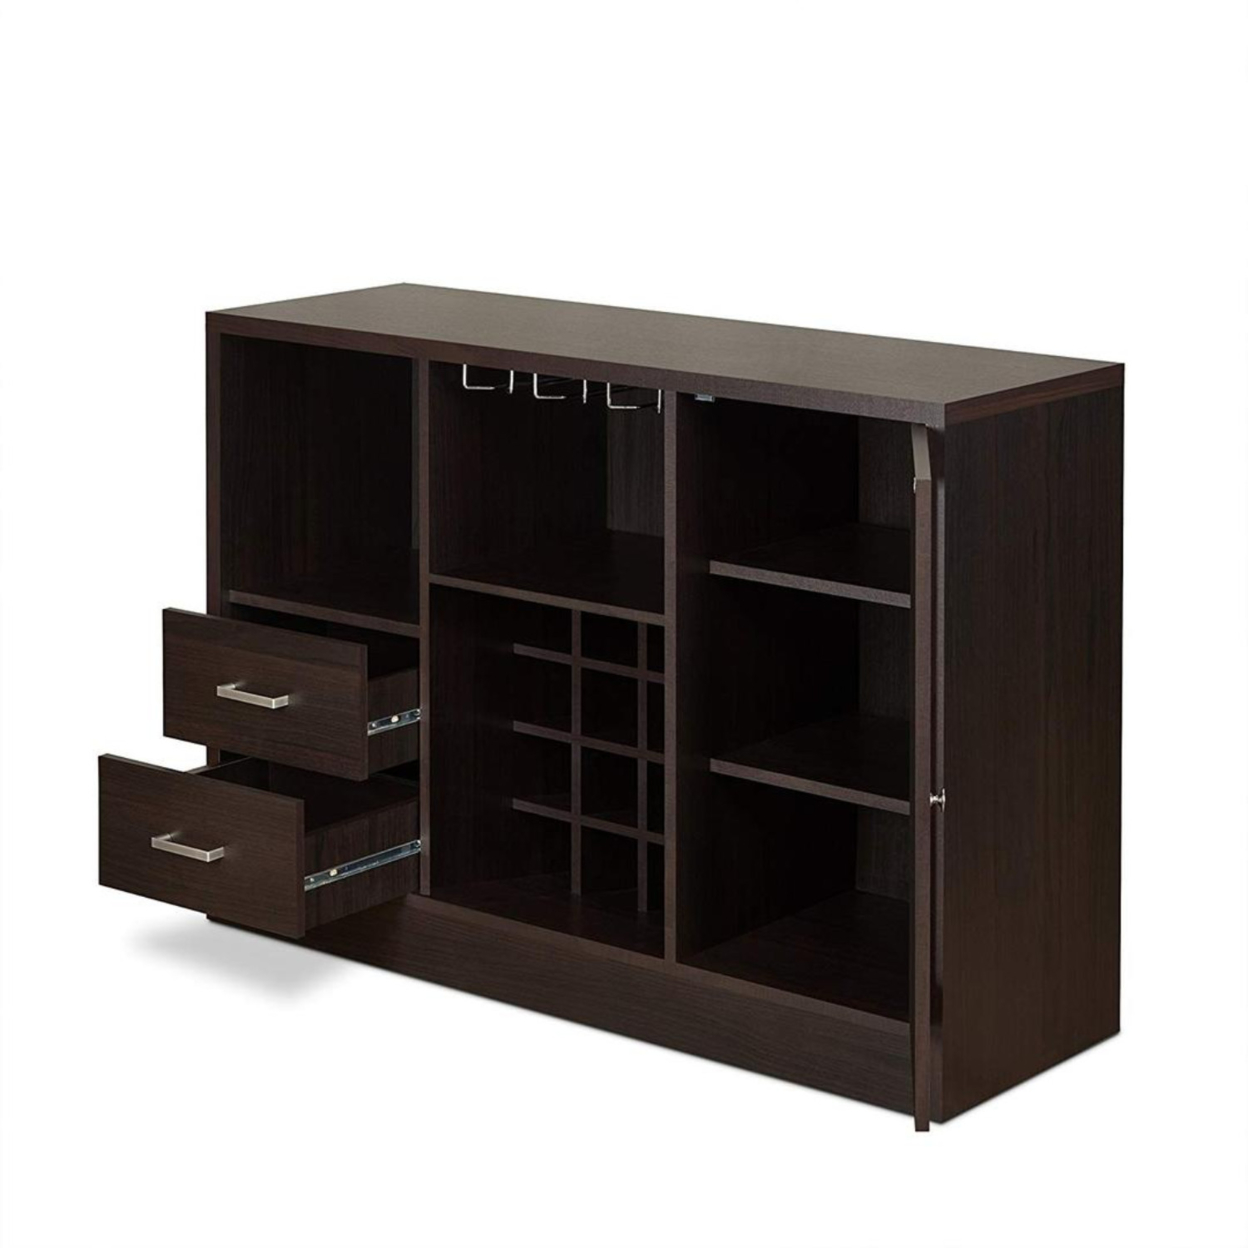 Wooden Server With One Side Door Storage Cabinets And Two Drawers, Espresso Brown- Saltoro Sherpi